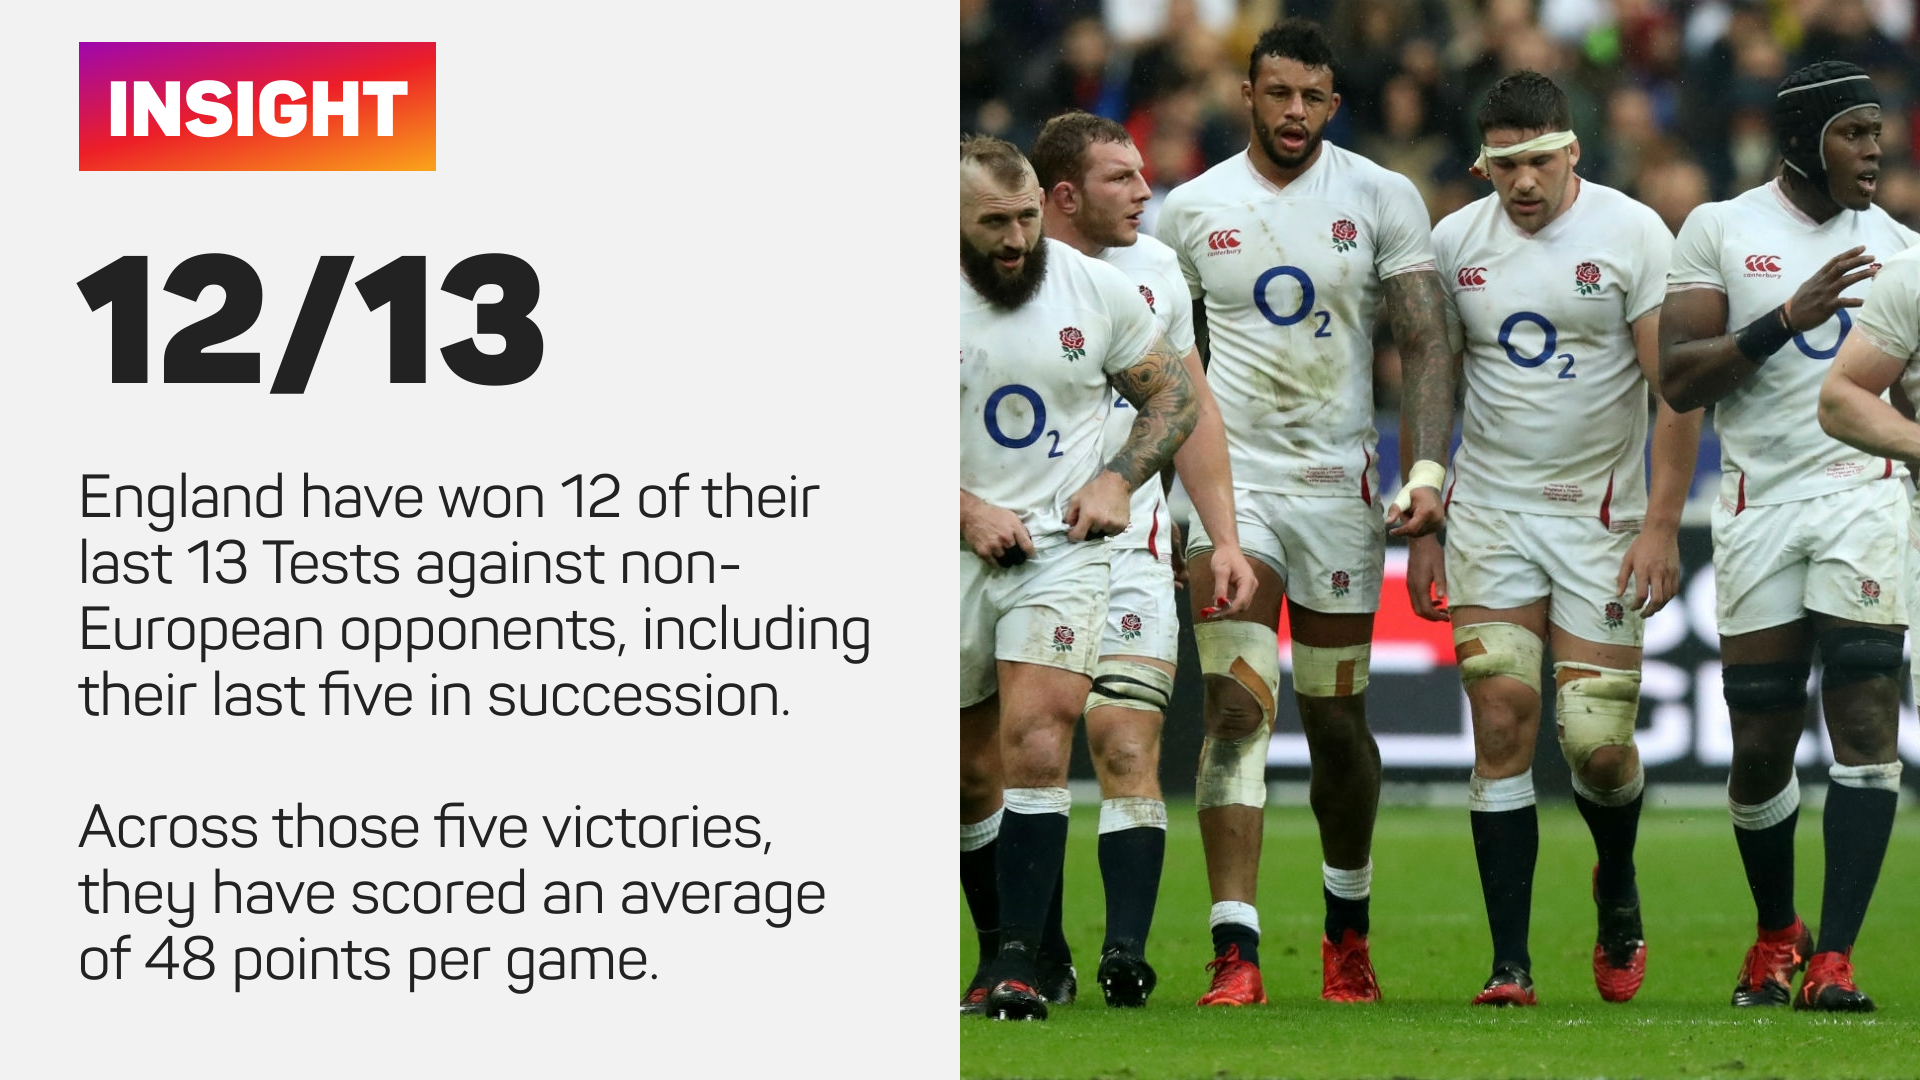 England have won 12 of their last 13 Tests against non-European sides